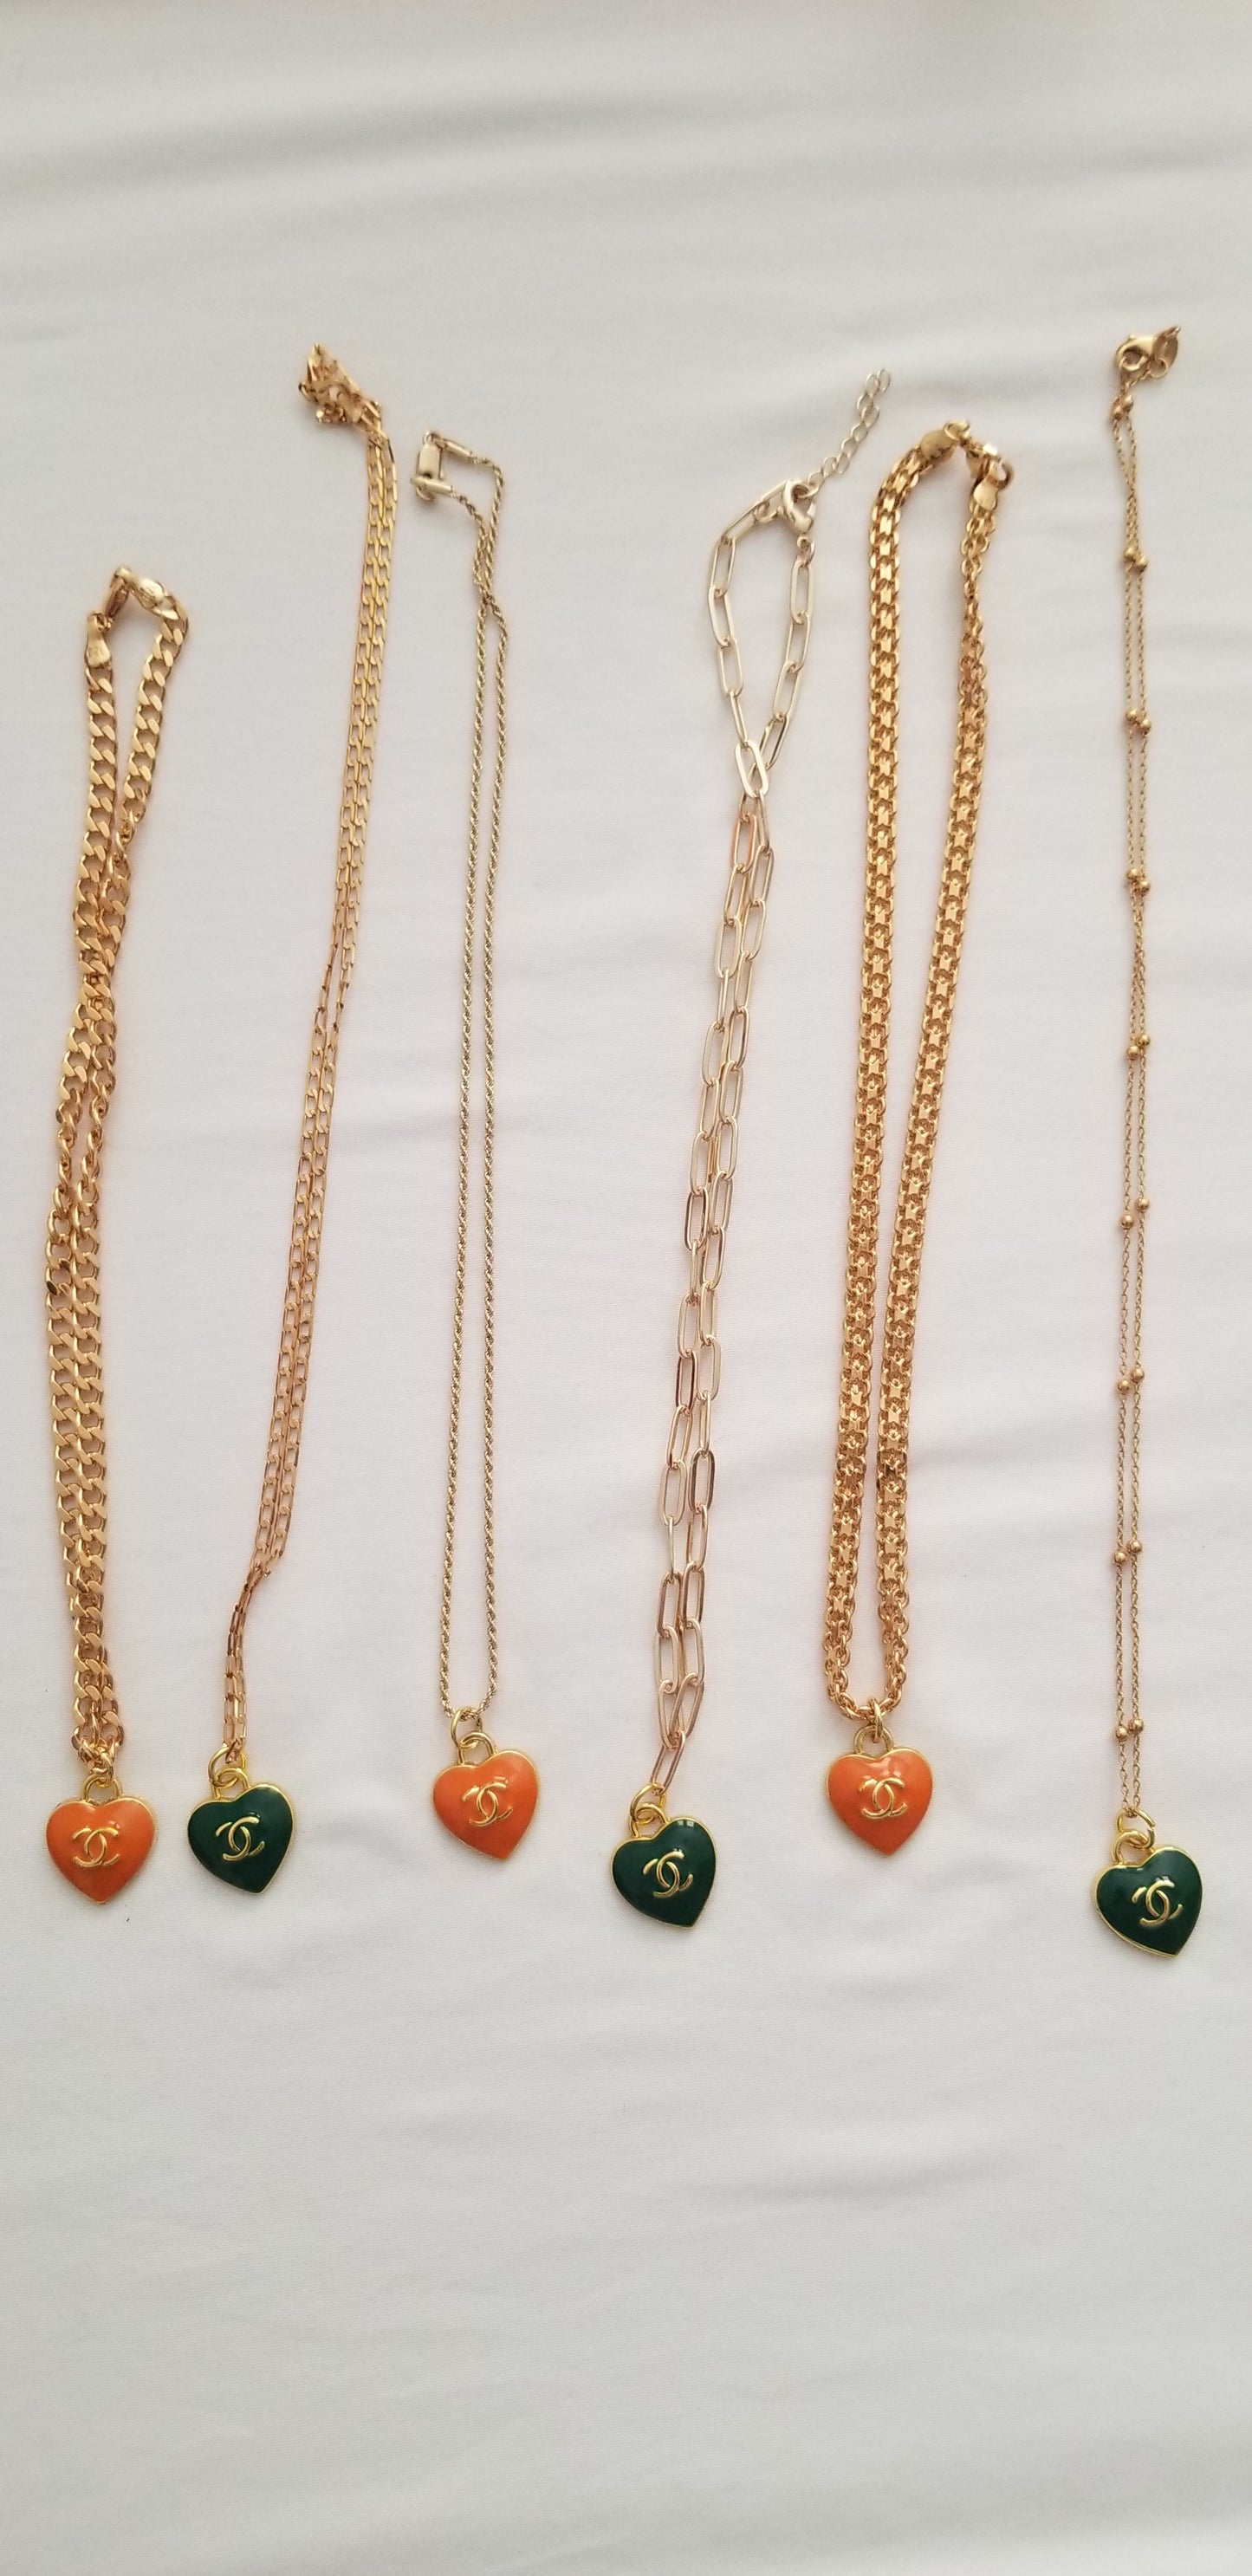 Chanel Green Heart Necklace Repurposed